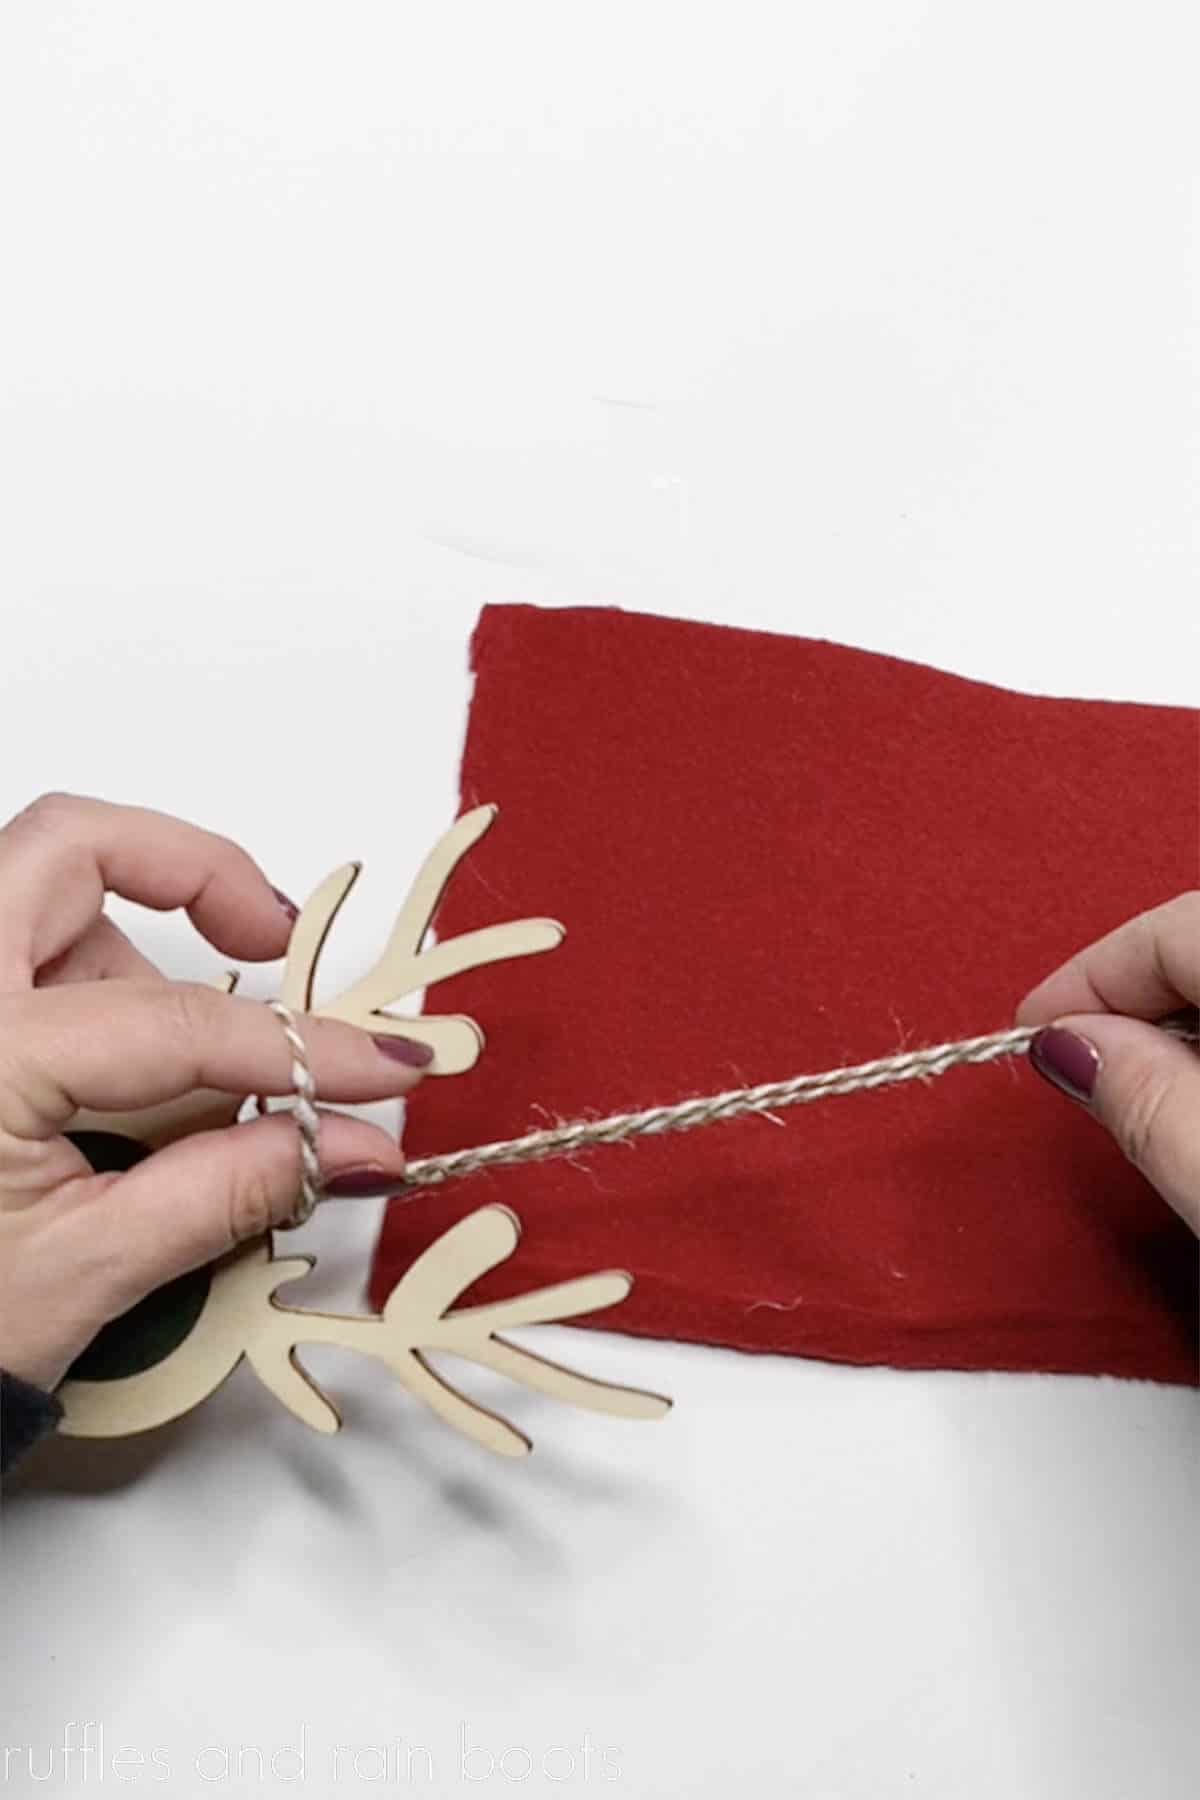 Crafter tying on a long piece of bakers twine for an ornament hanger.